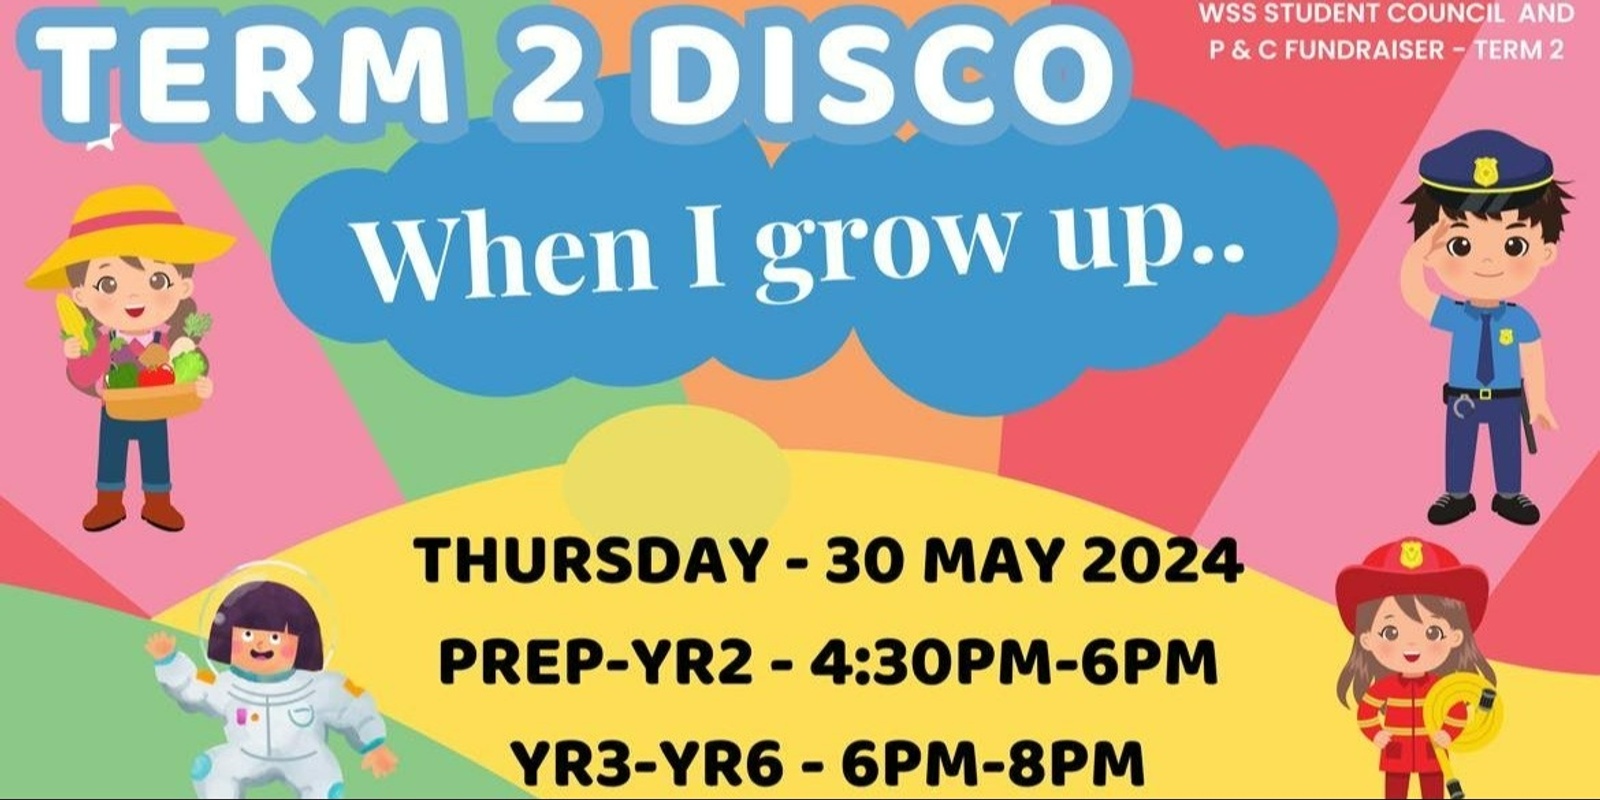 Banner image for When I Grow Up! Term 2 Disco WSS